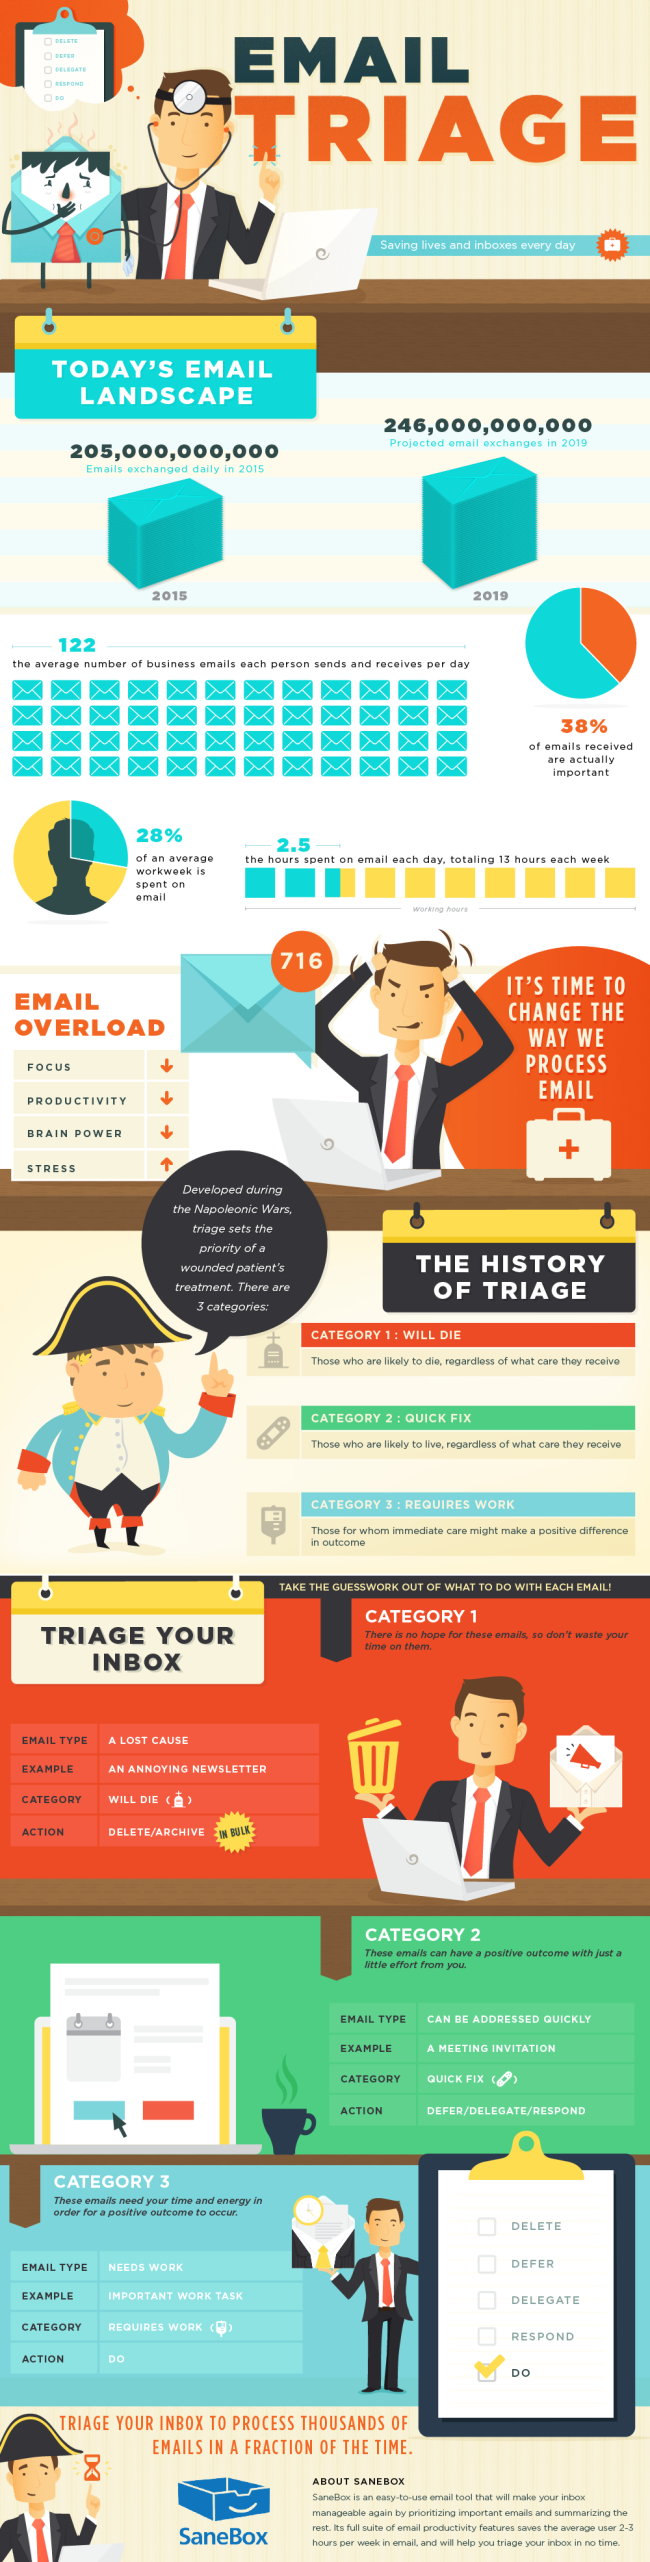 Email Triage: An Email Management Infographic by SaneBox